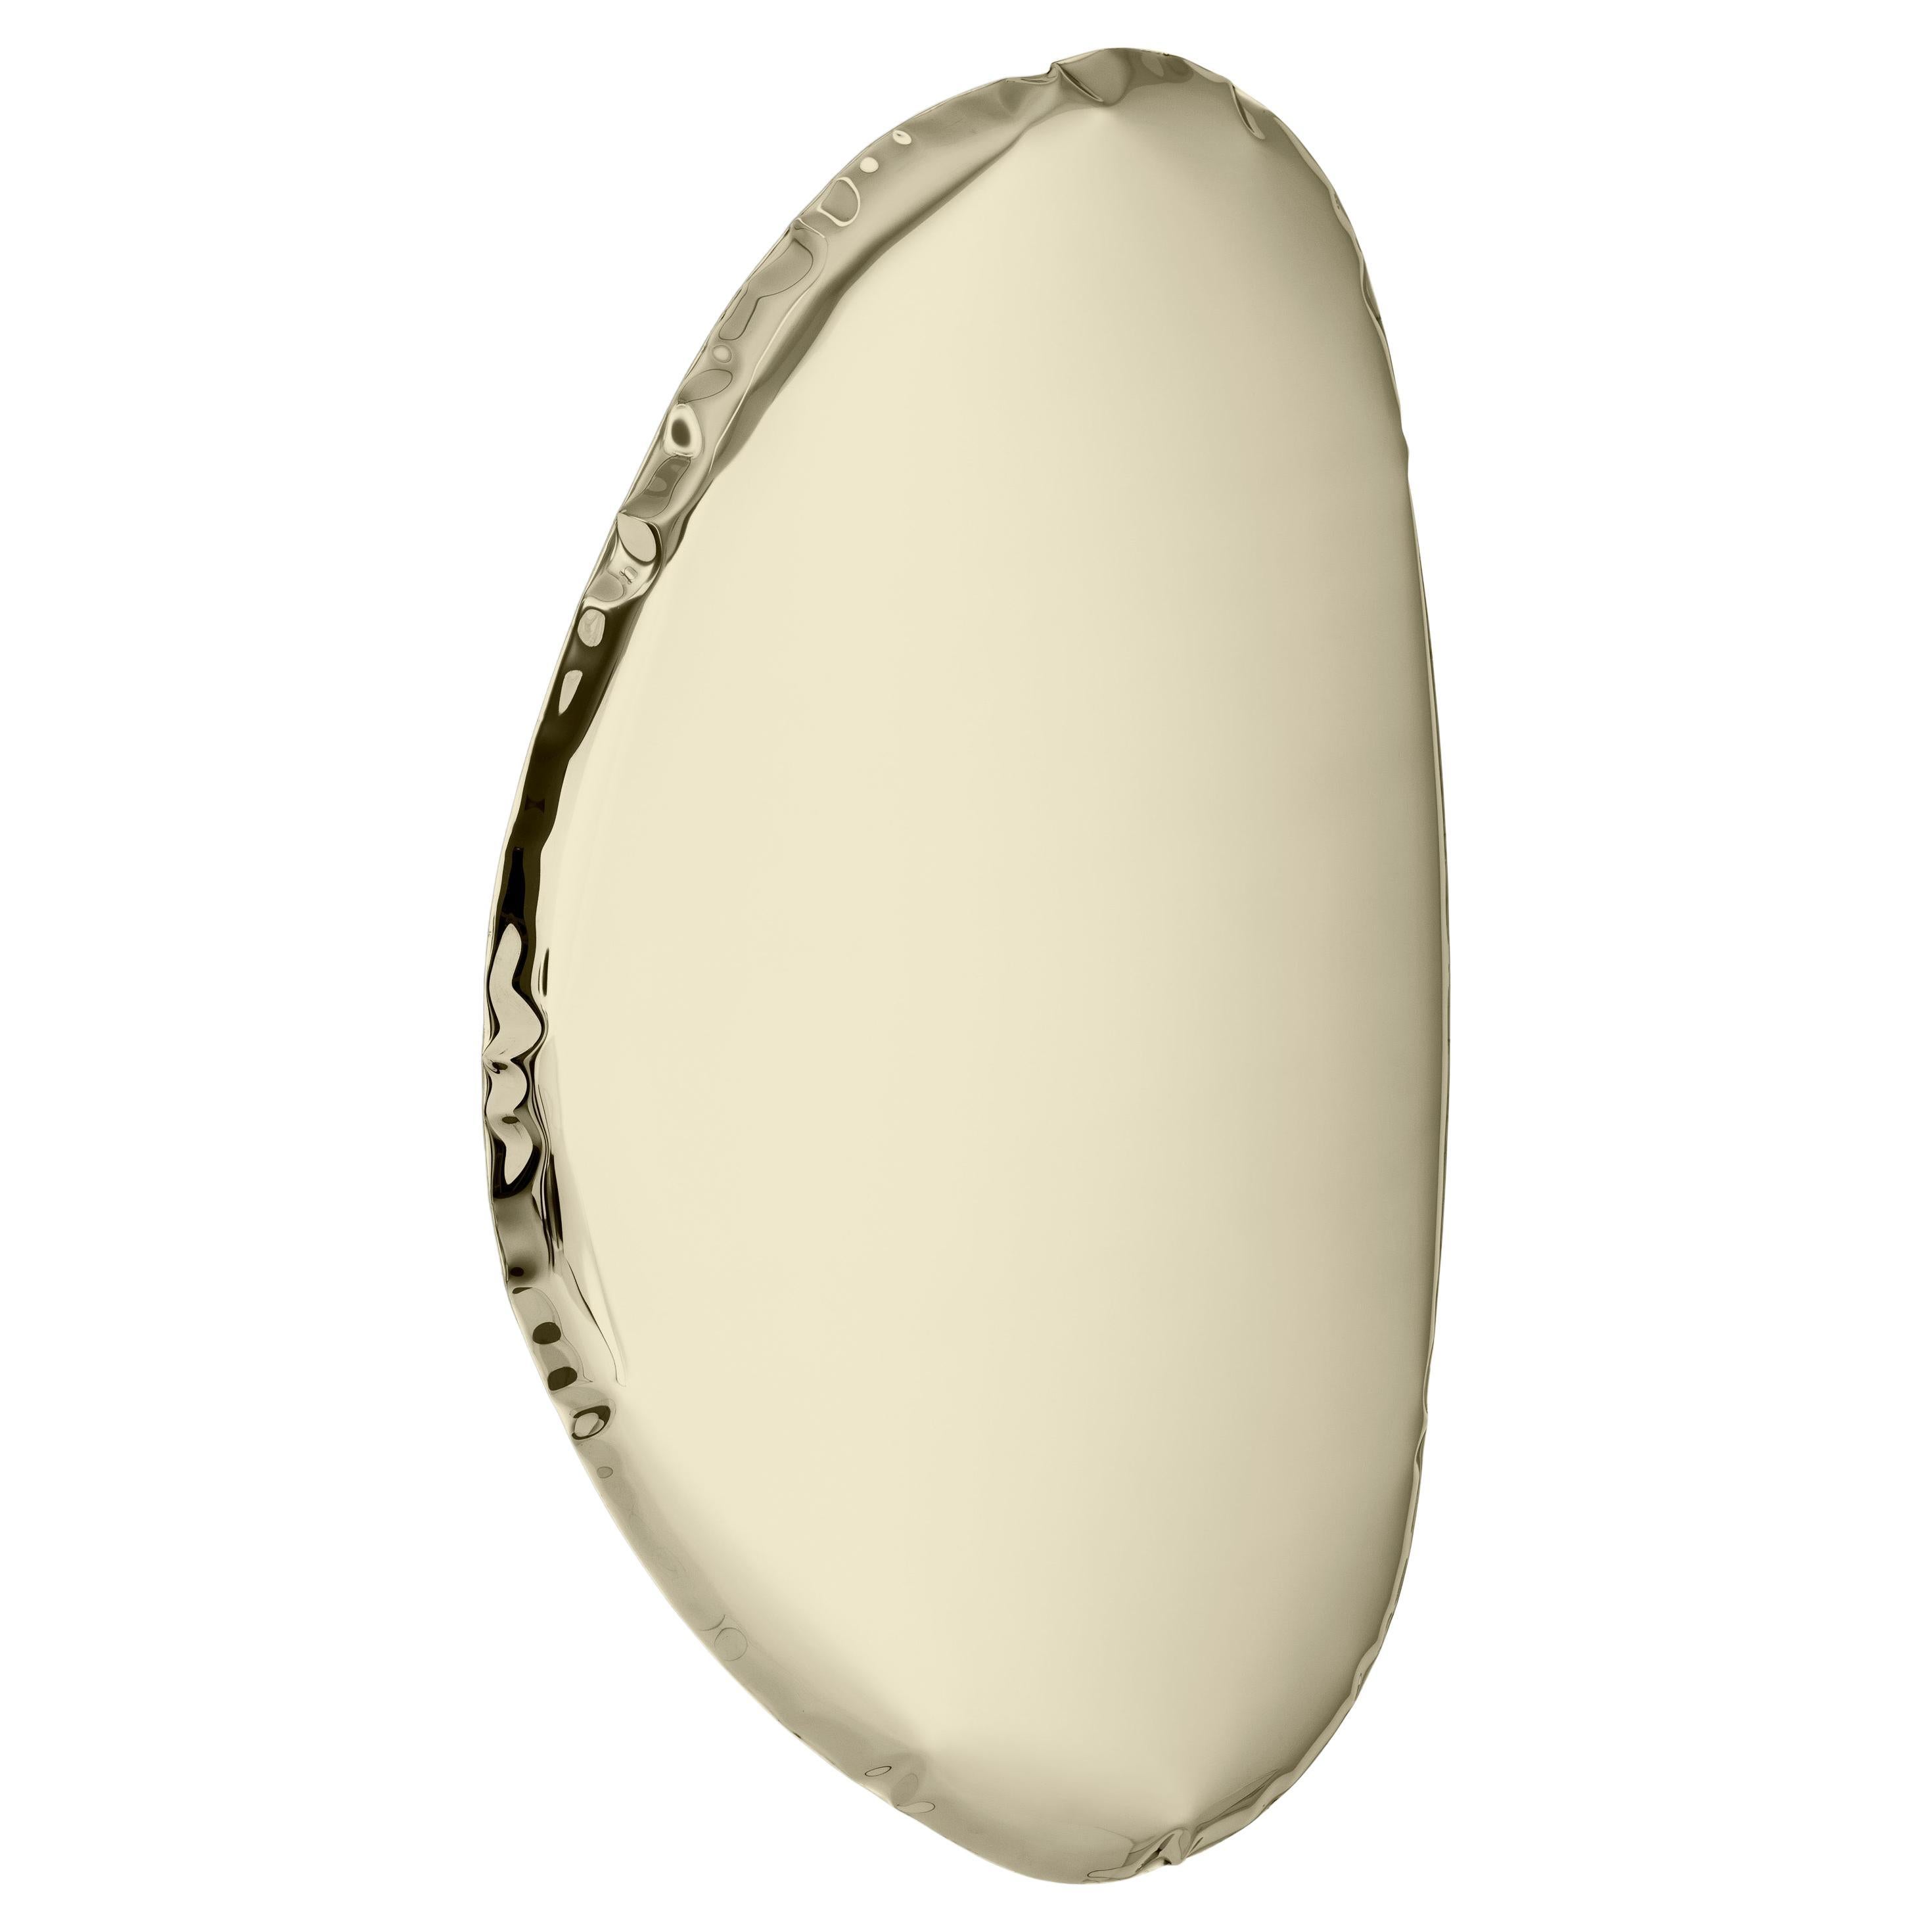 Tafla O3 Polished Stainless Steel Light Gold Color Wall Mirror by Zieta For Sale